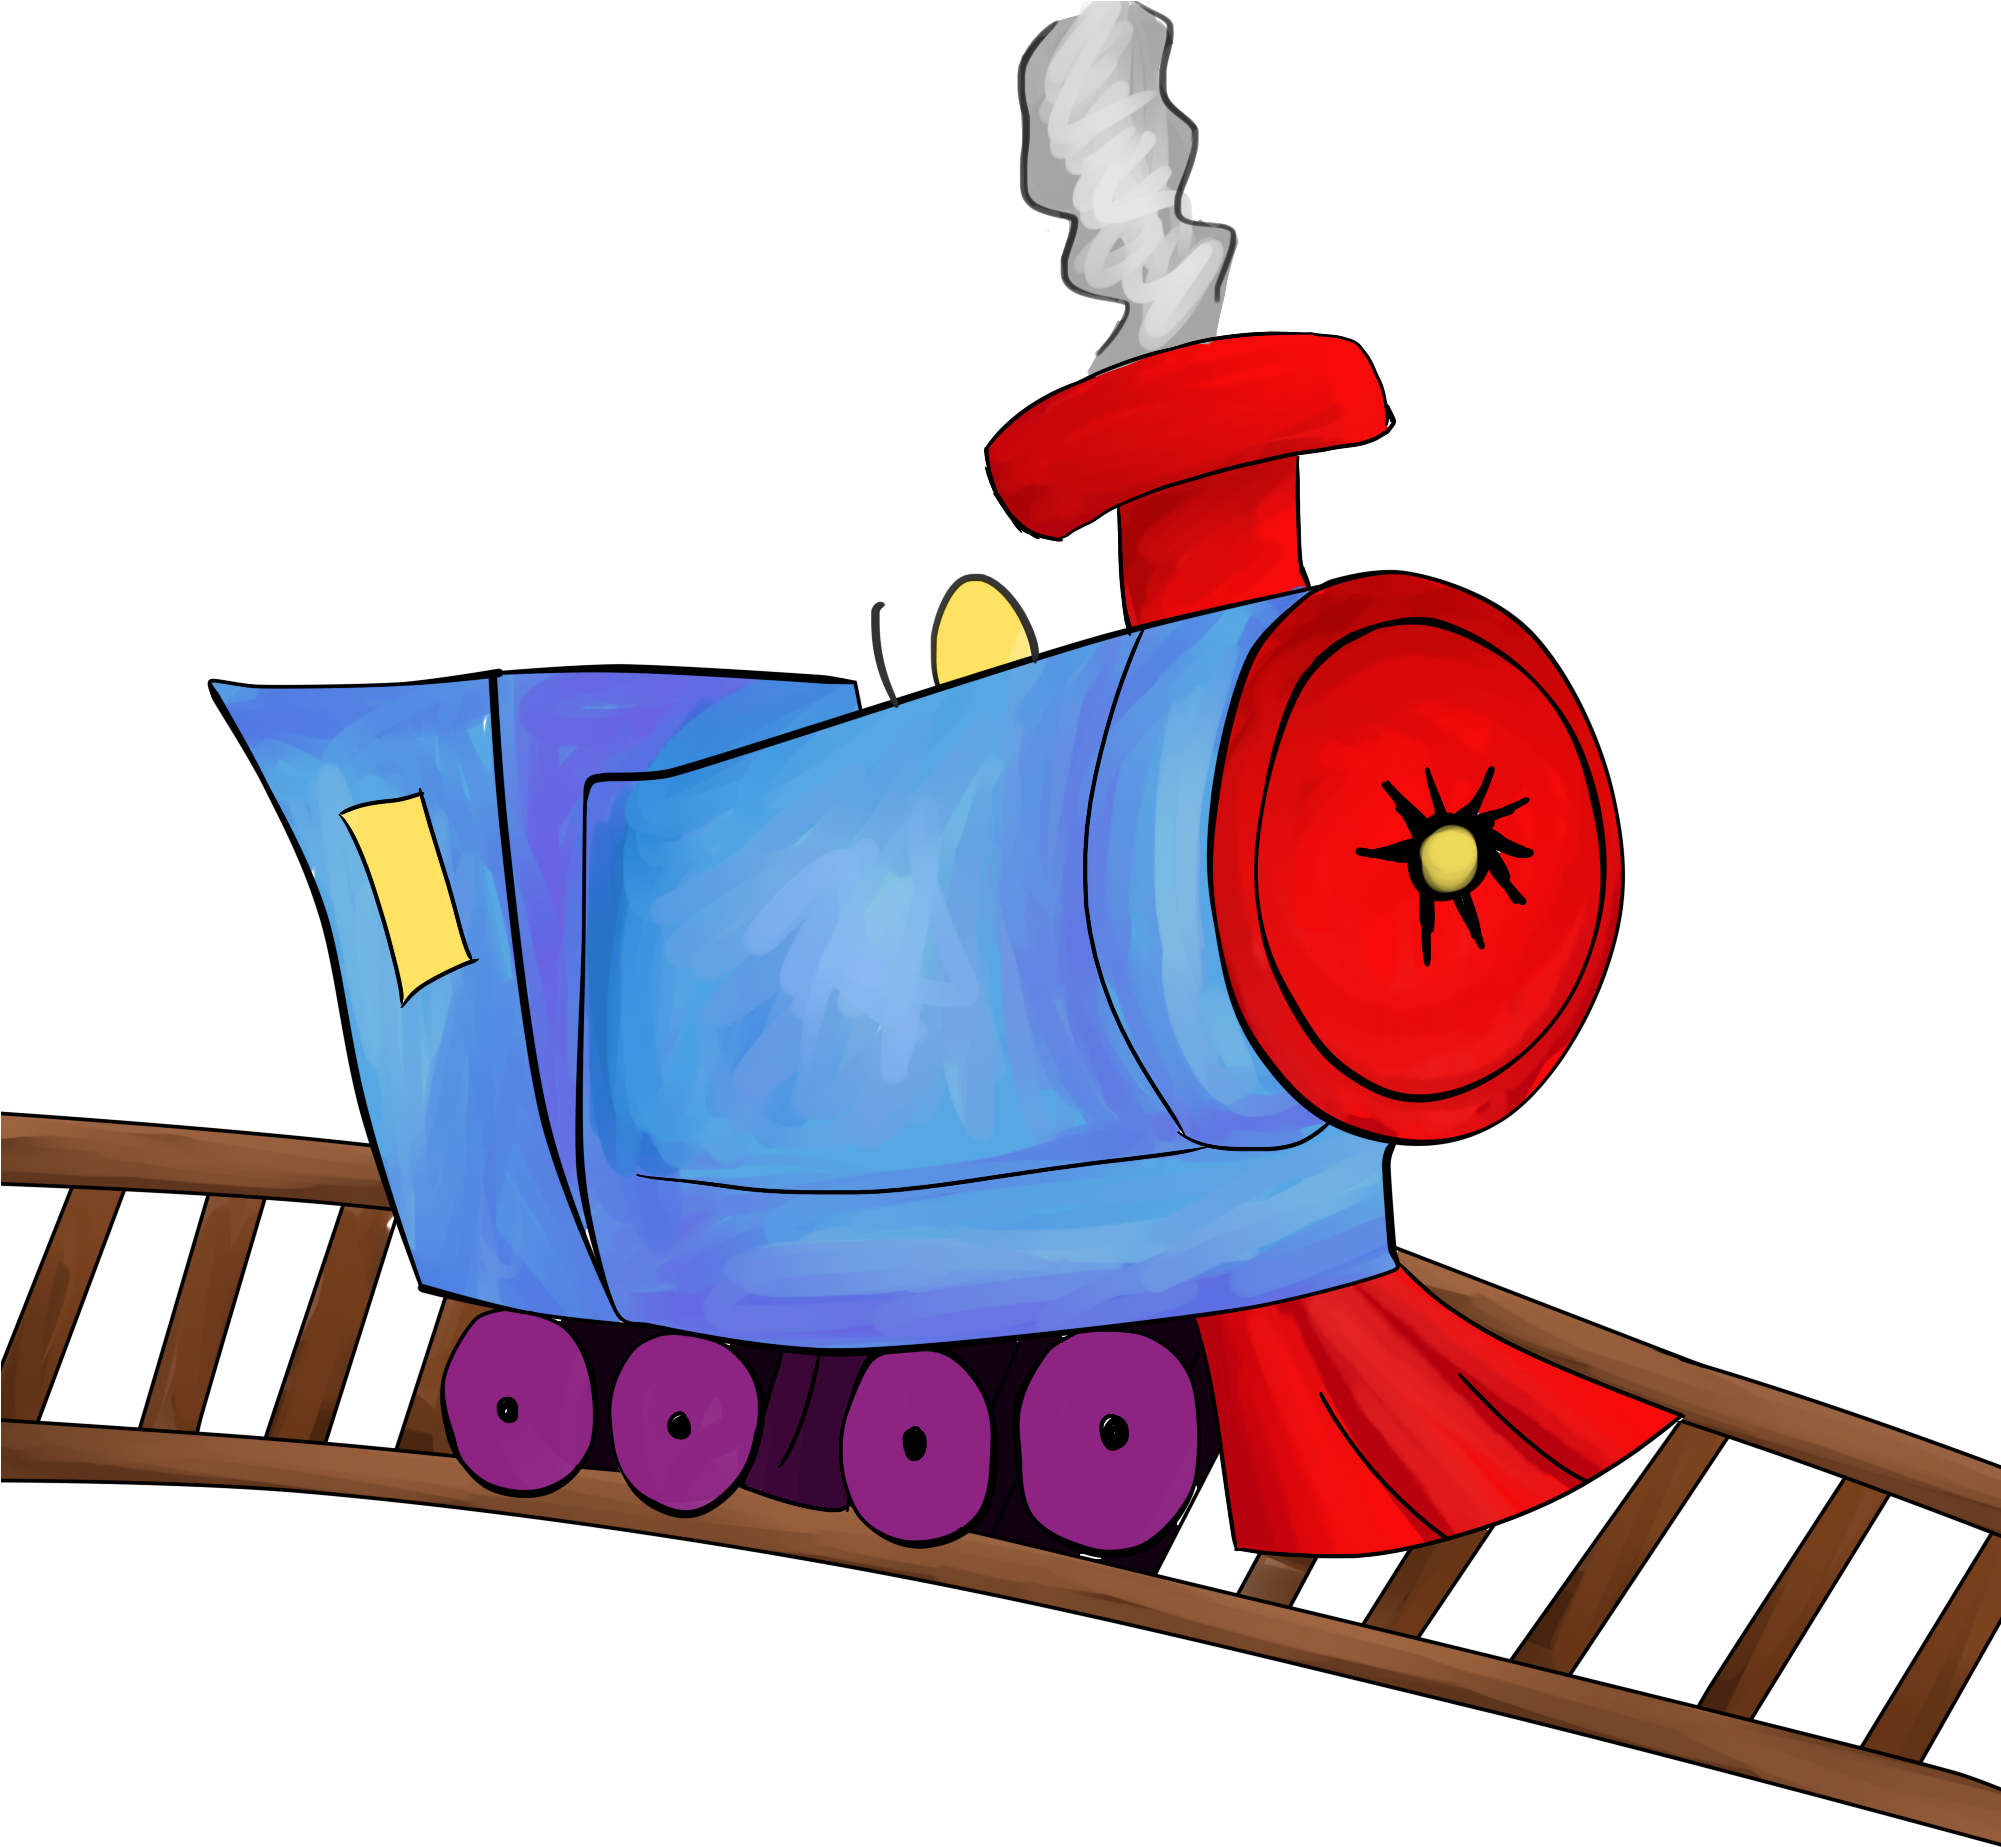 Train Free To Use Clip Art - Train On Track Clipart (2000x2000)